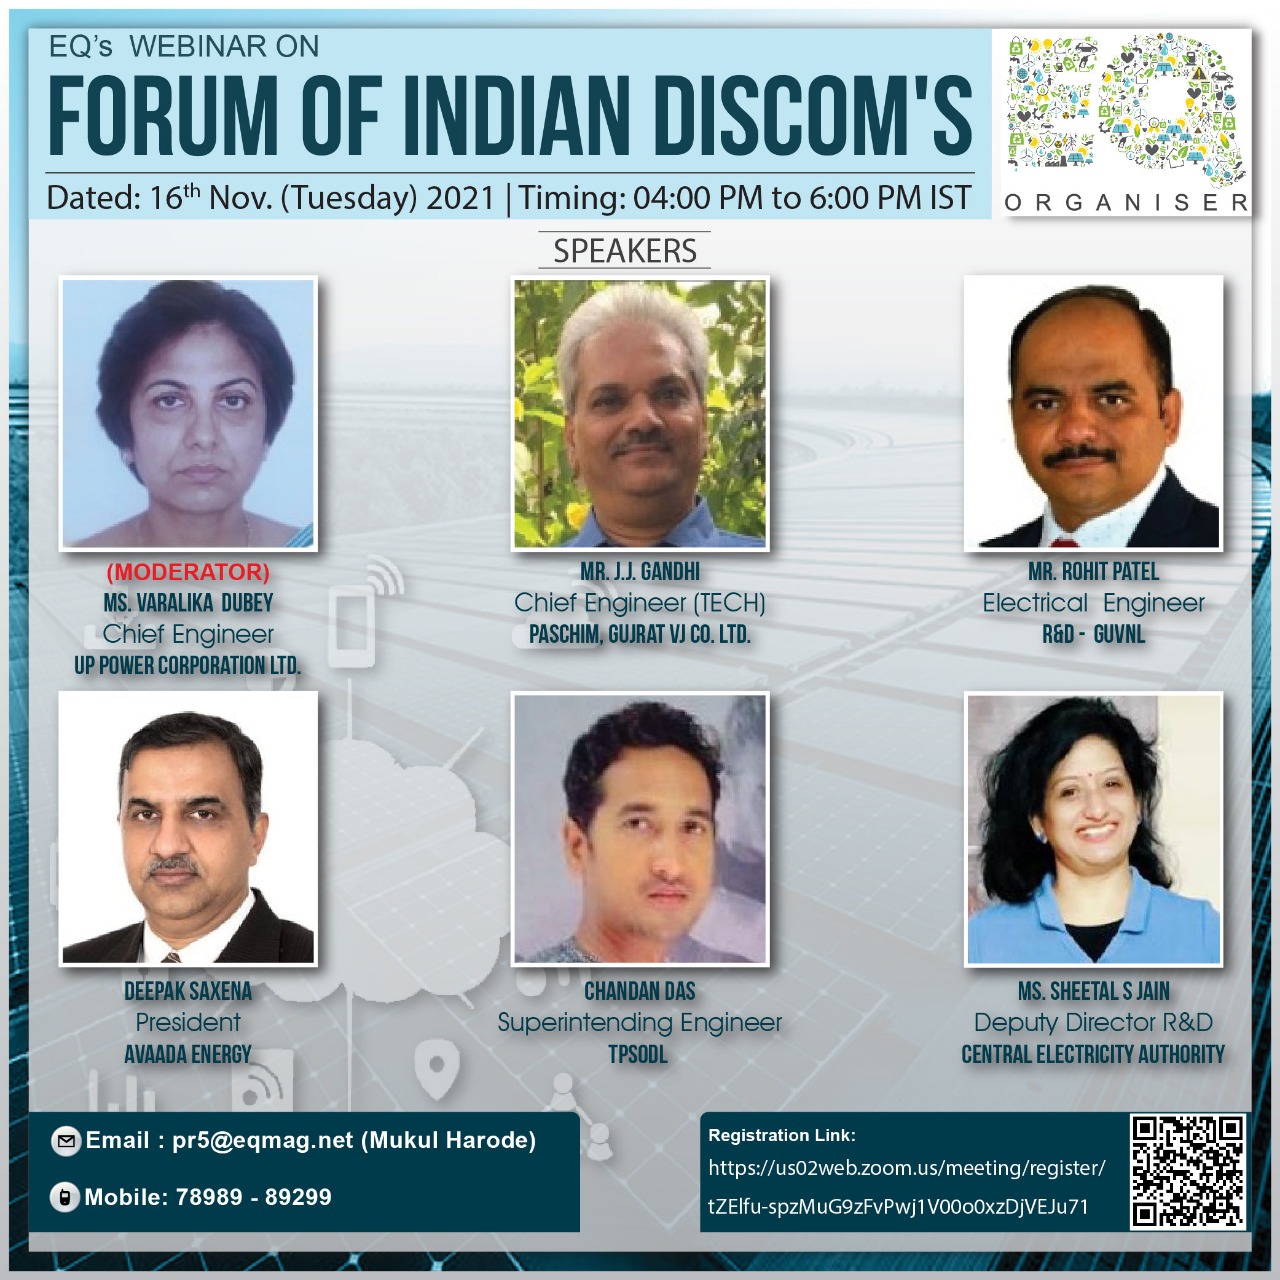 EQ Webinar on Forum of Indian DISCOMS On Tuesday November 16th From 4:00 PM Onwards…. Register Now !!!